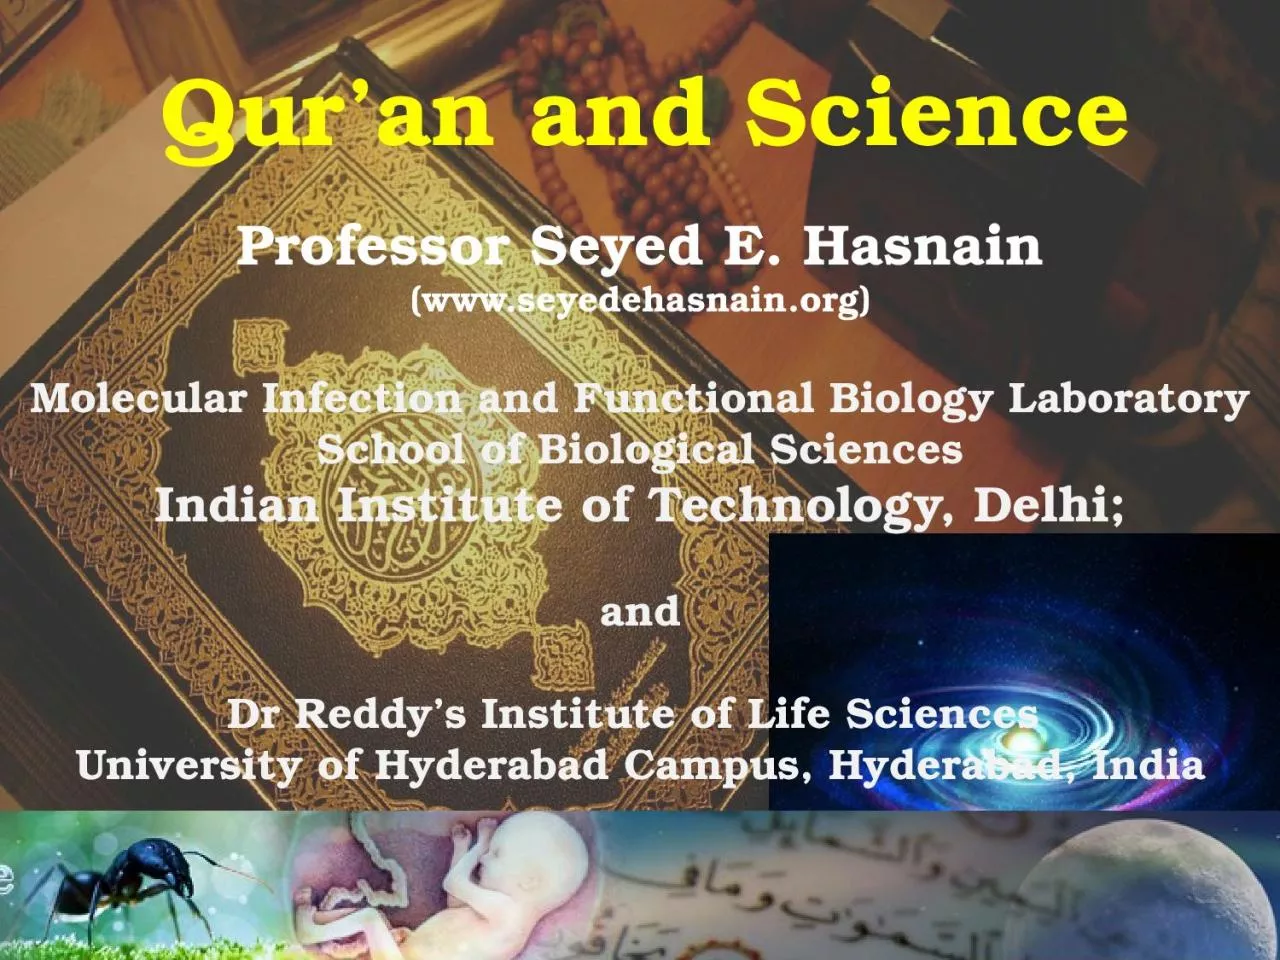 Qur’an and Science Professor Seyed E. Hasnain